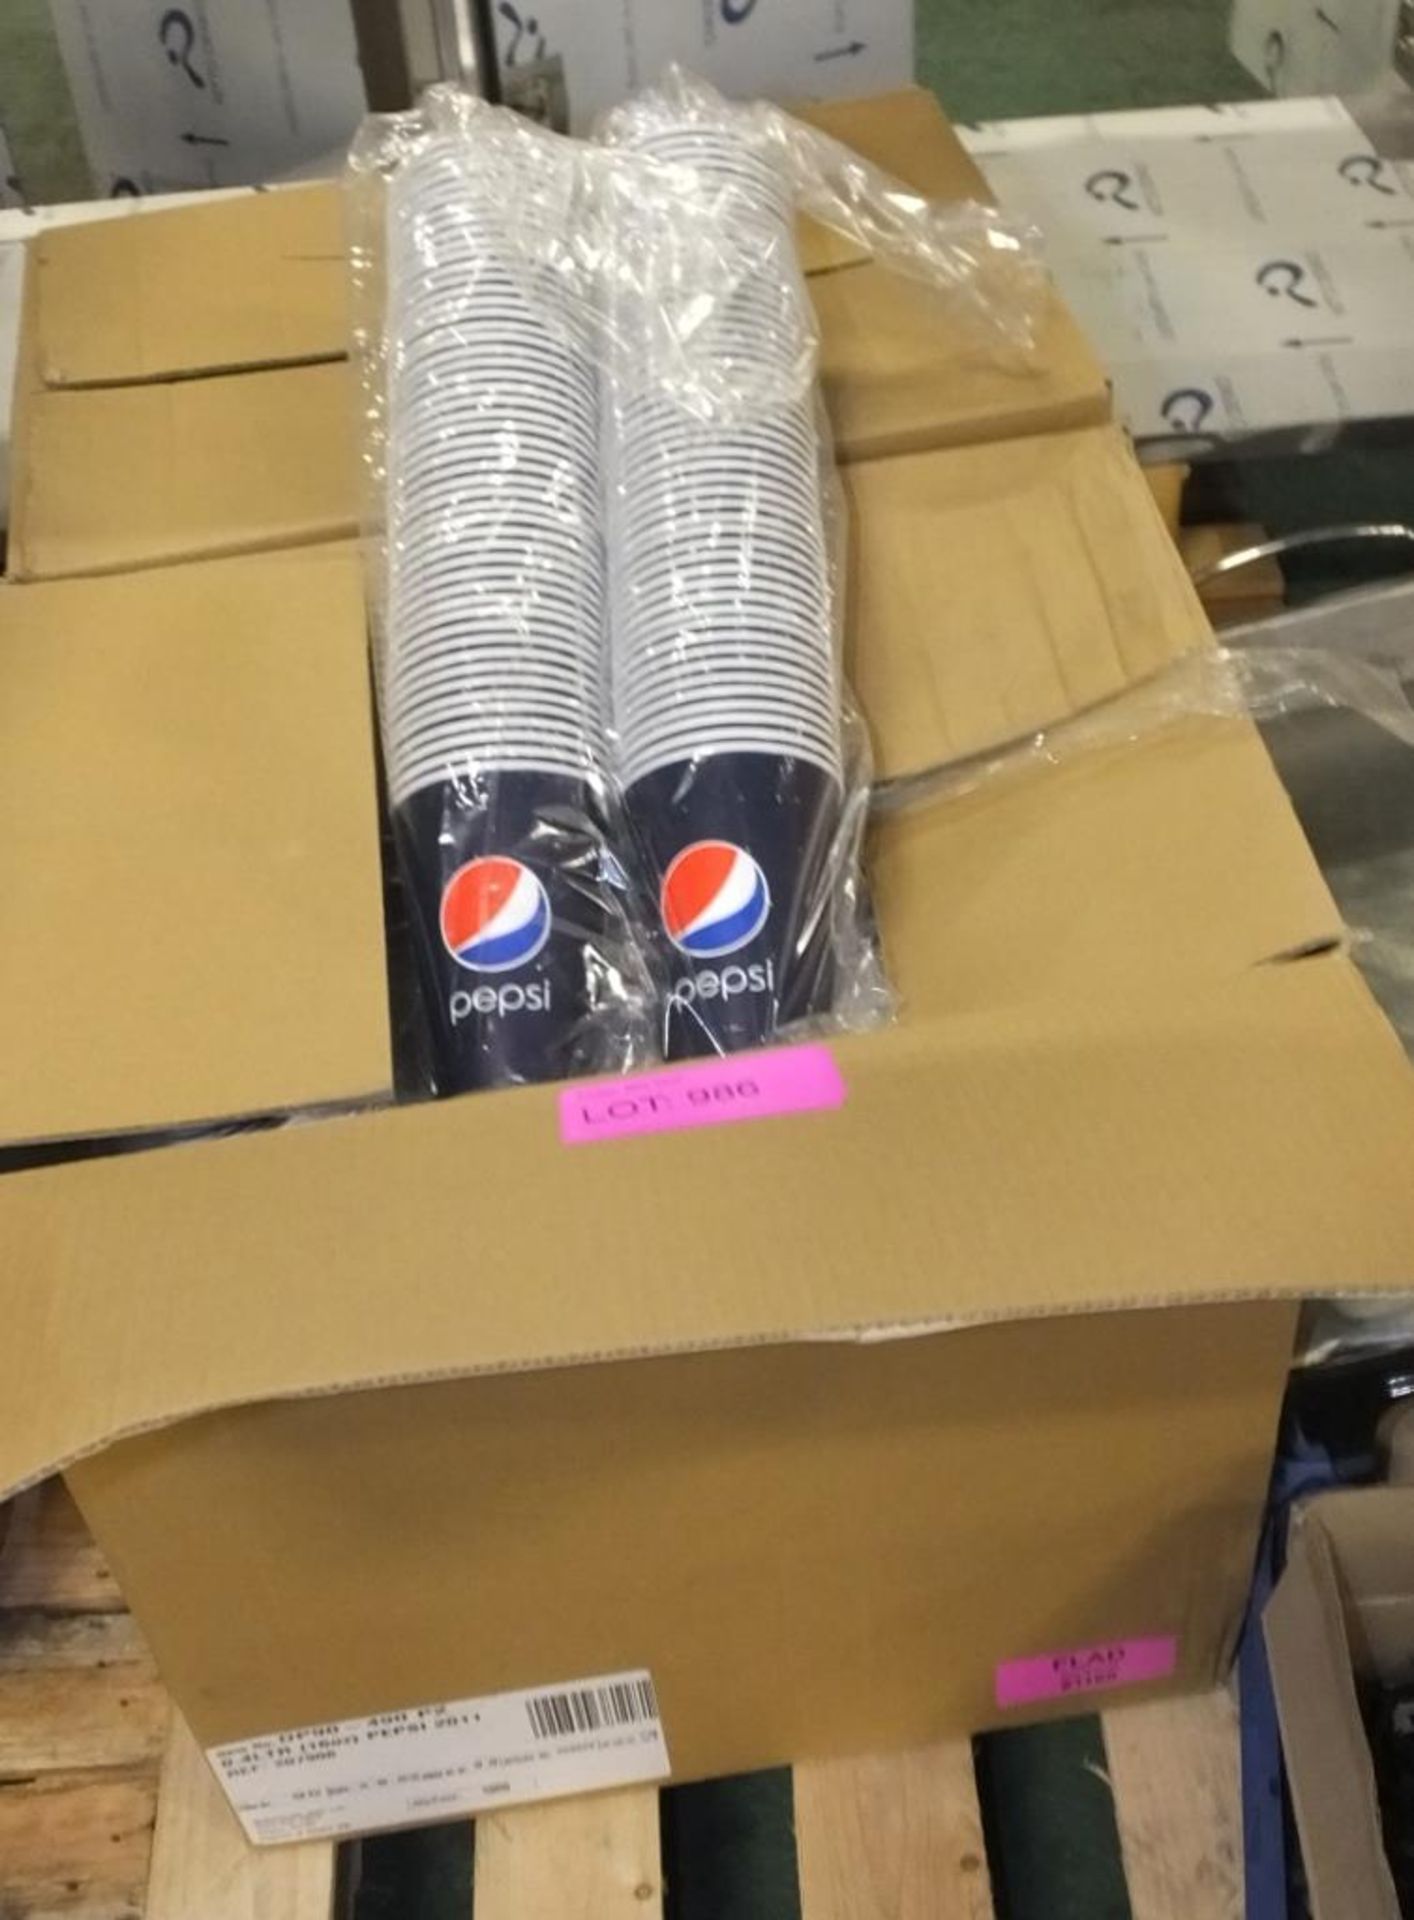 2x Boxes of Pepsi paper cups